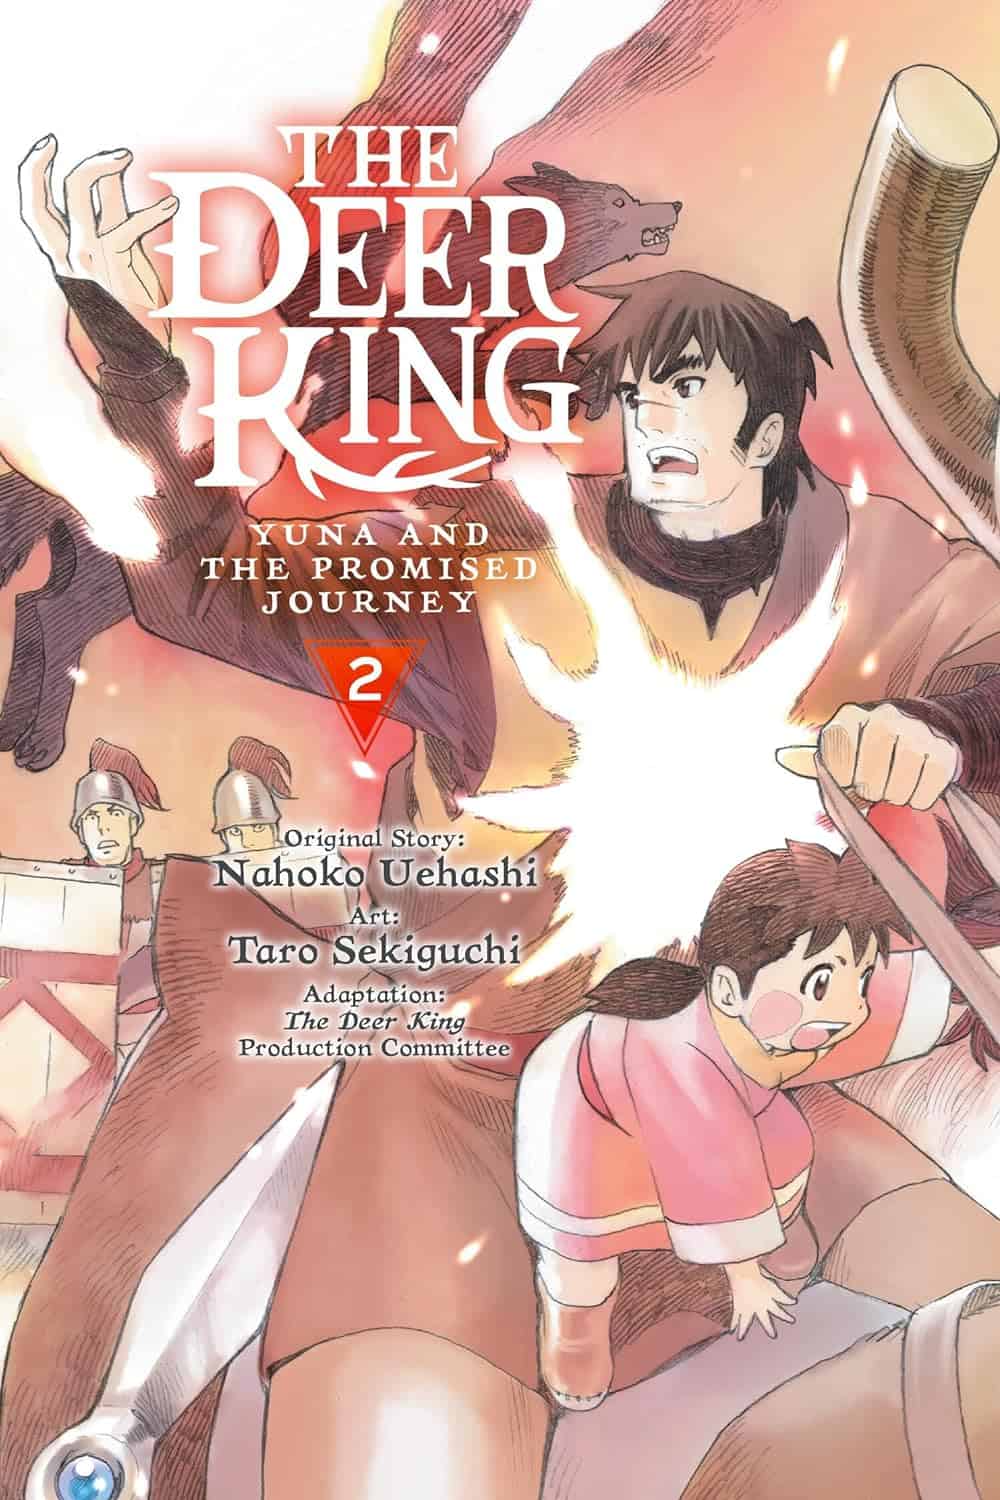 Cover Vol. 2 The Deer King